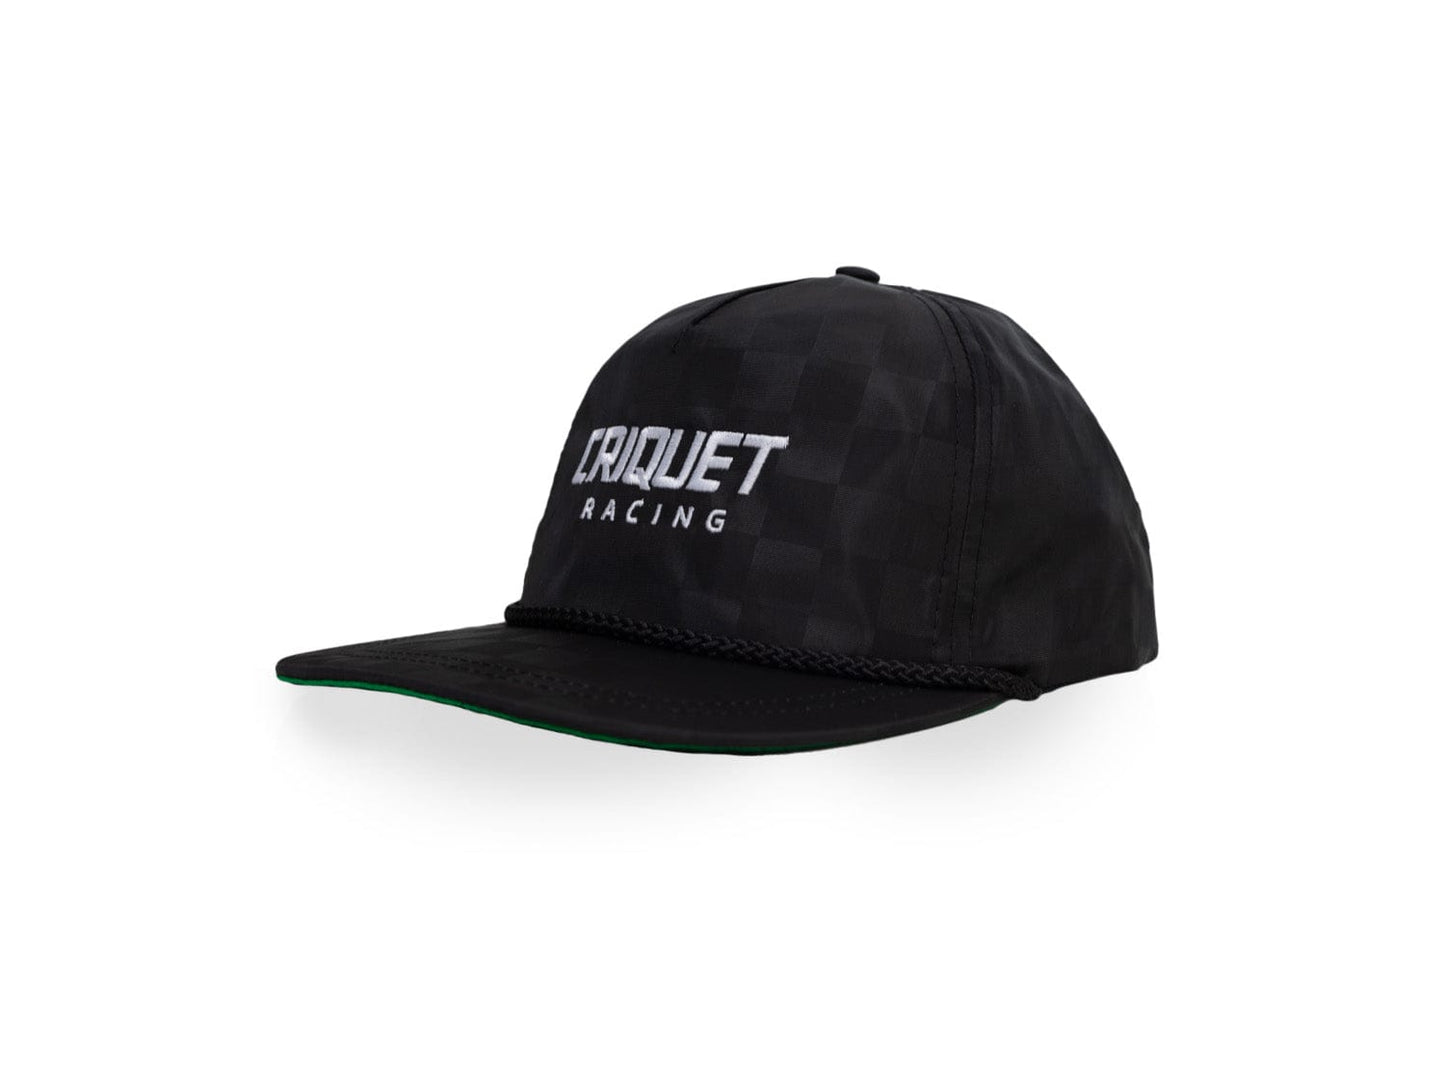 Checkered Rope Hat - Criquet Racing - Black